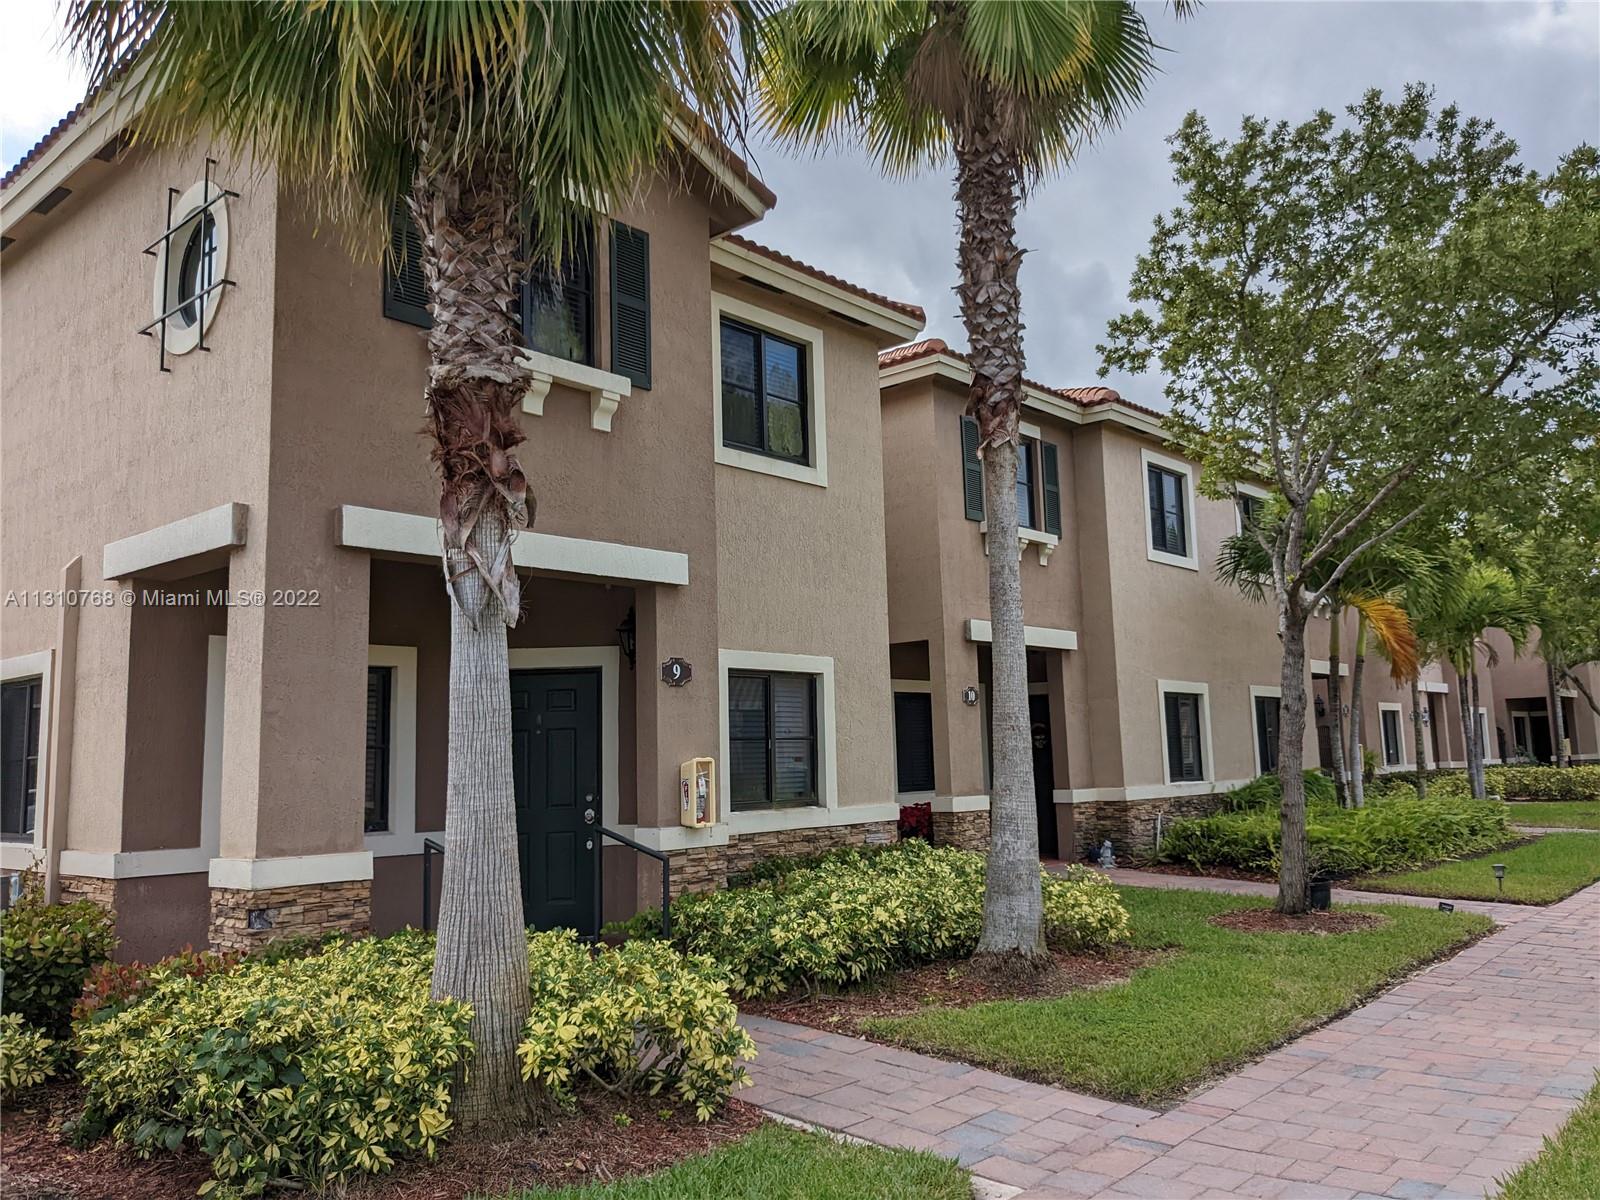 Beautiful 3 bedroom and 2.5 bath townhome in popular Courts at Bayshore. Home boasts a bright and open floorplan, kitchen with stainless appliances and granite countertops. Patio off the dining area and balcony off the master bedroom. Okay to lease right away and pet friendly!